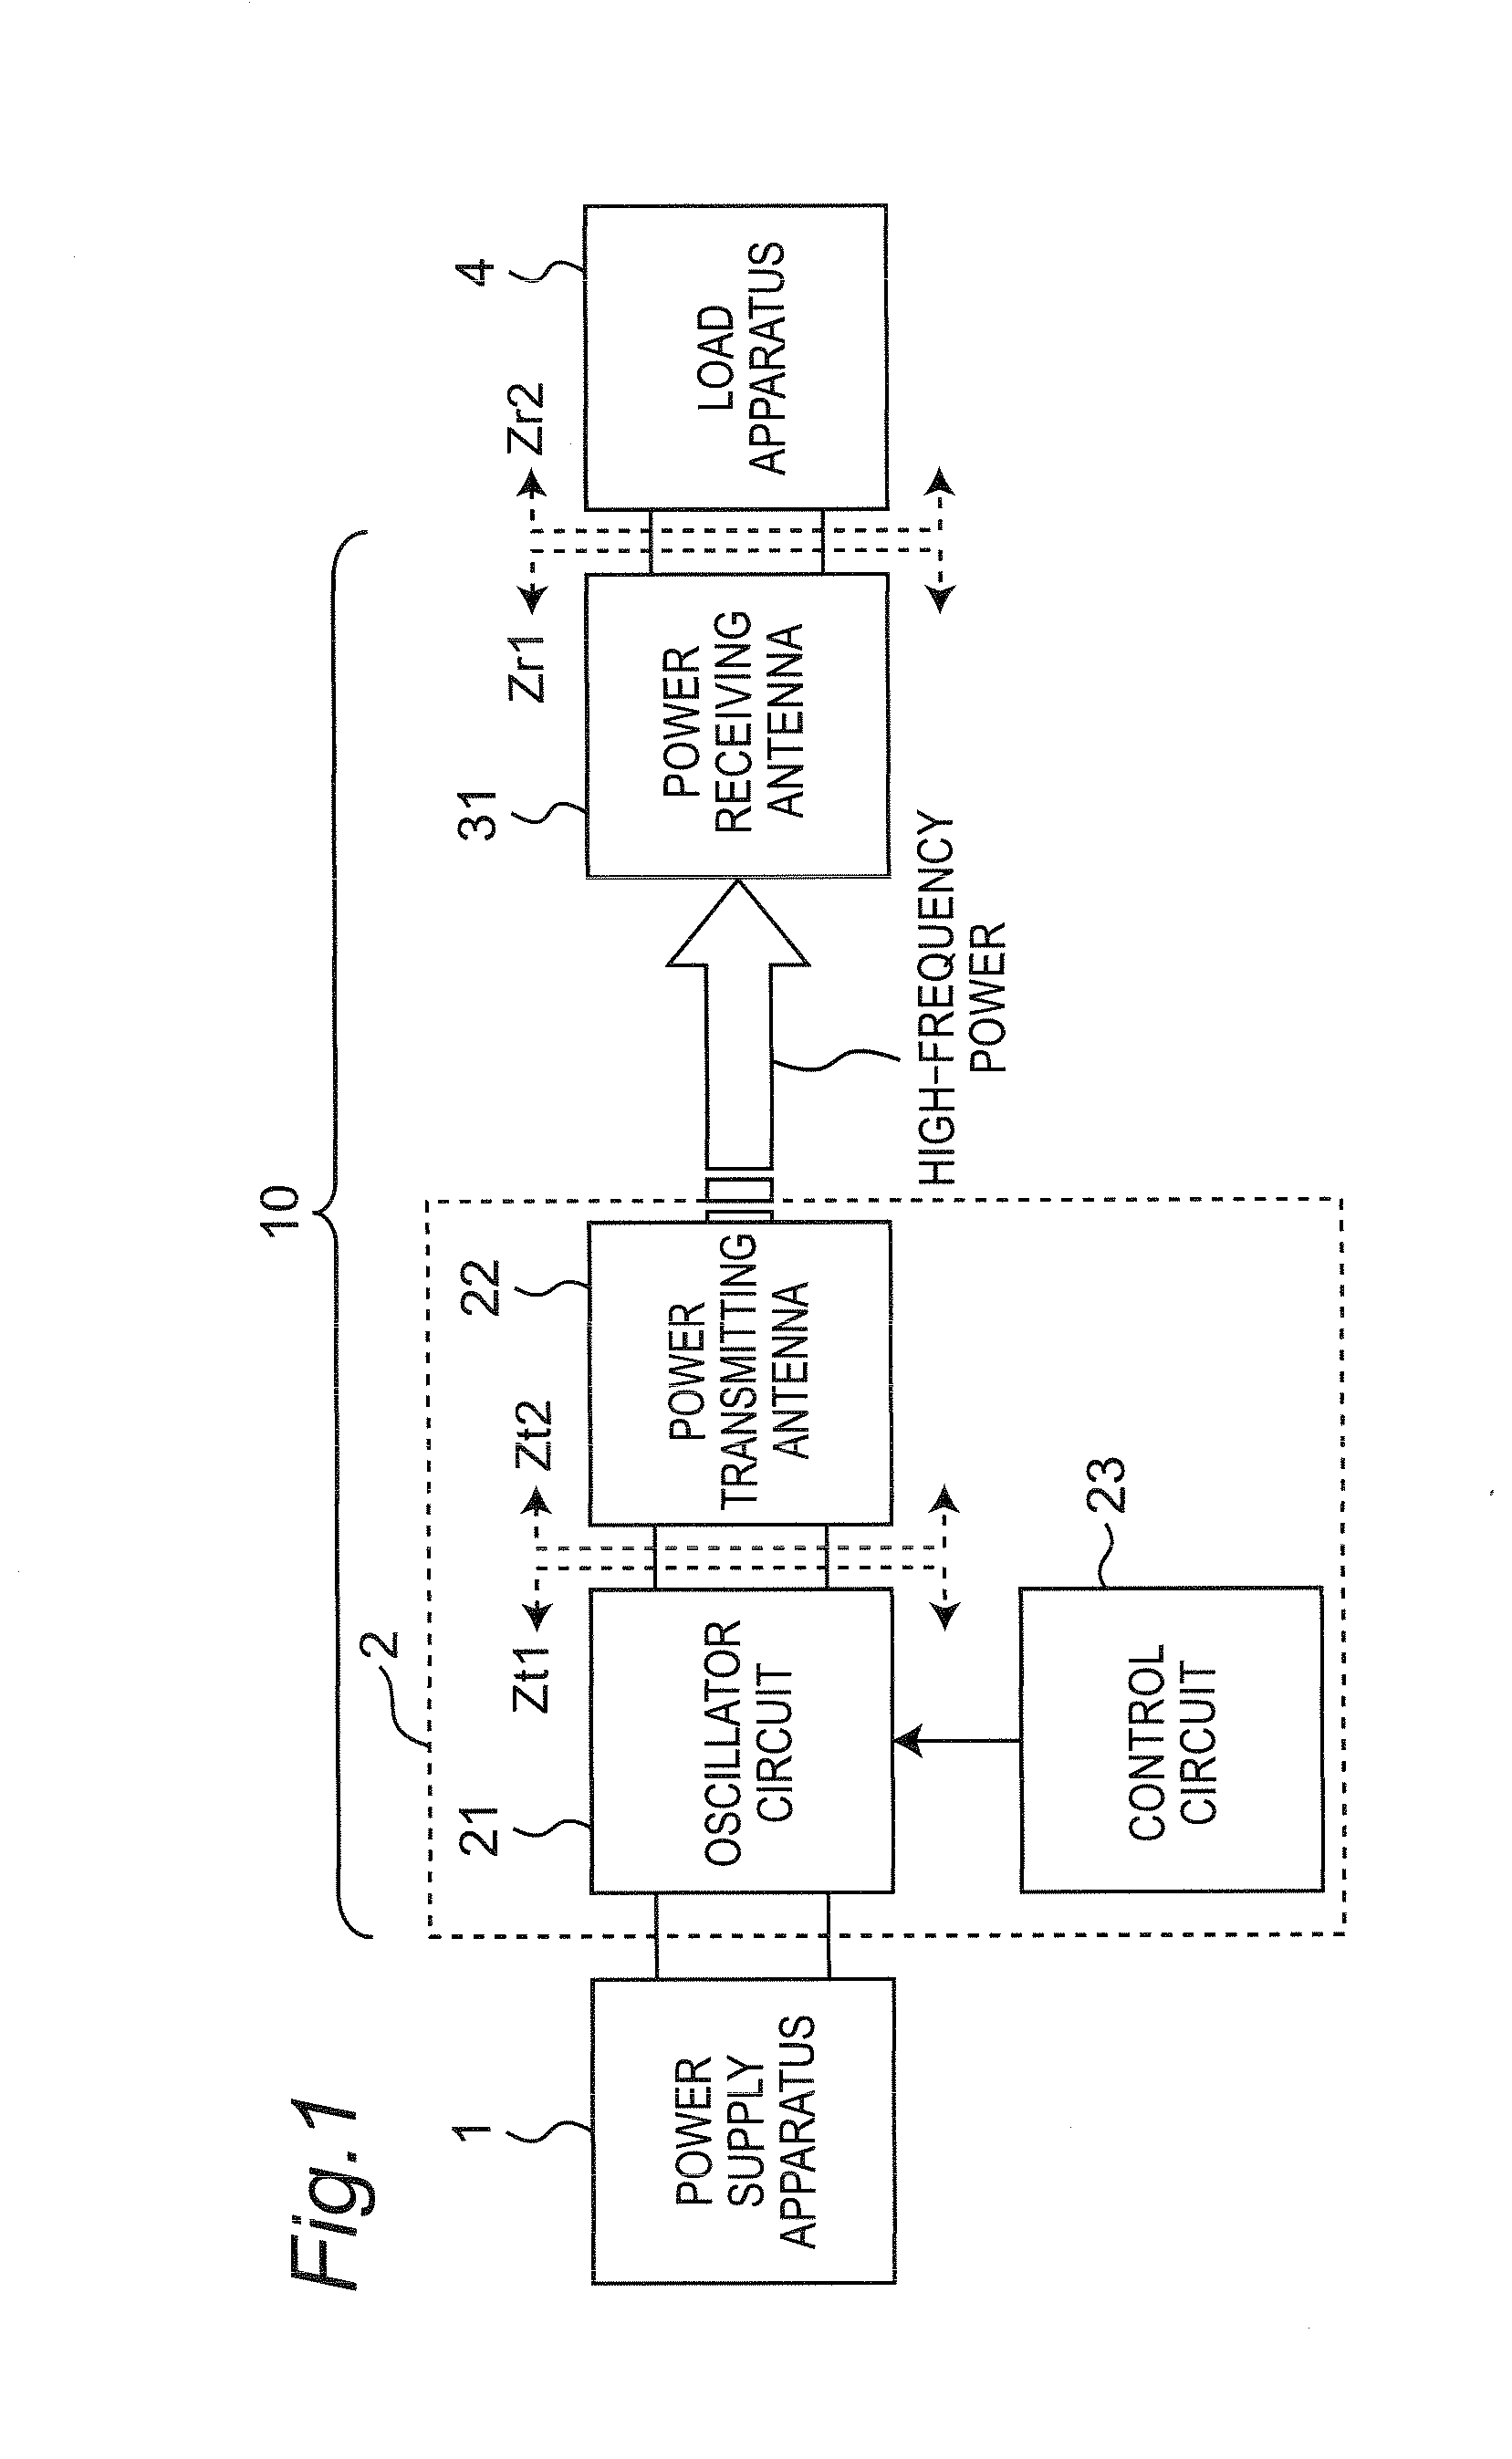 Wireless power transmission system capable of continuing power transmission while suppressing heatup of foreign objects